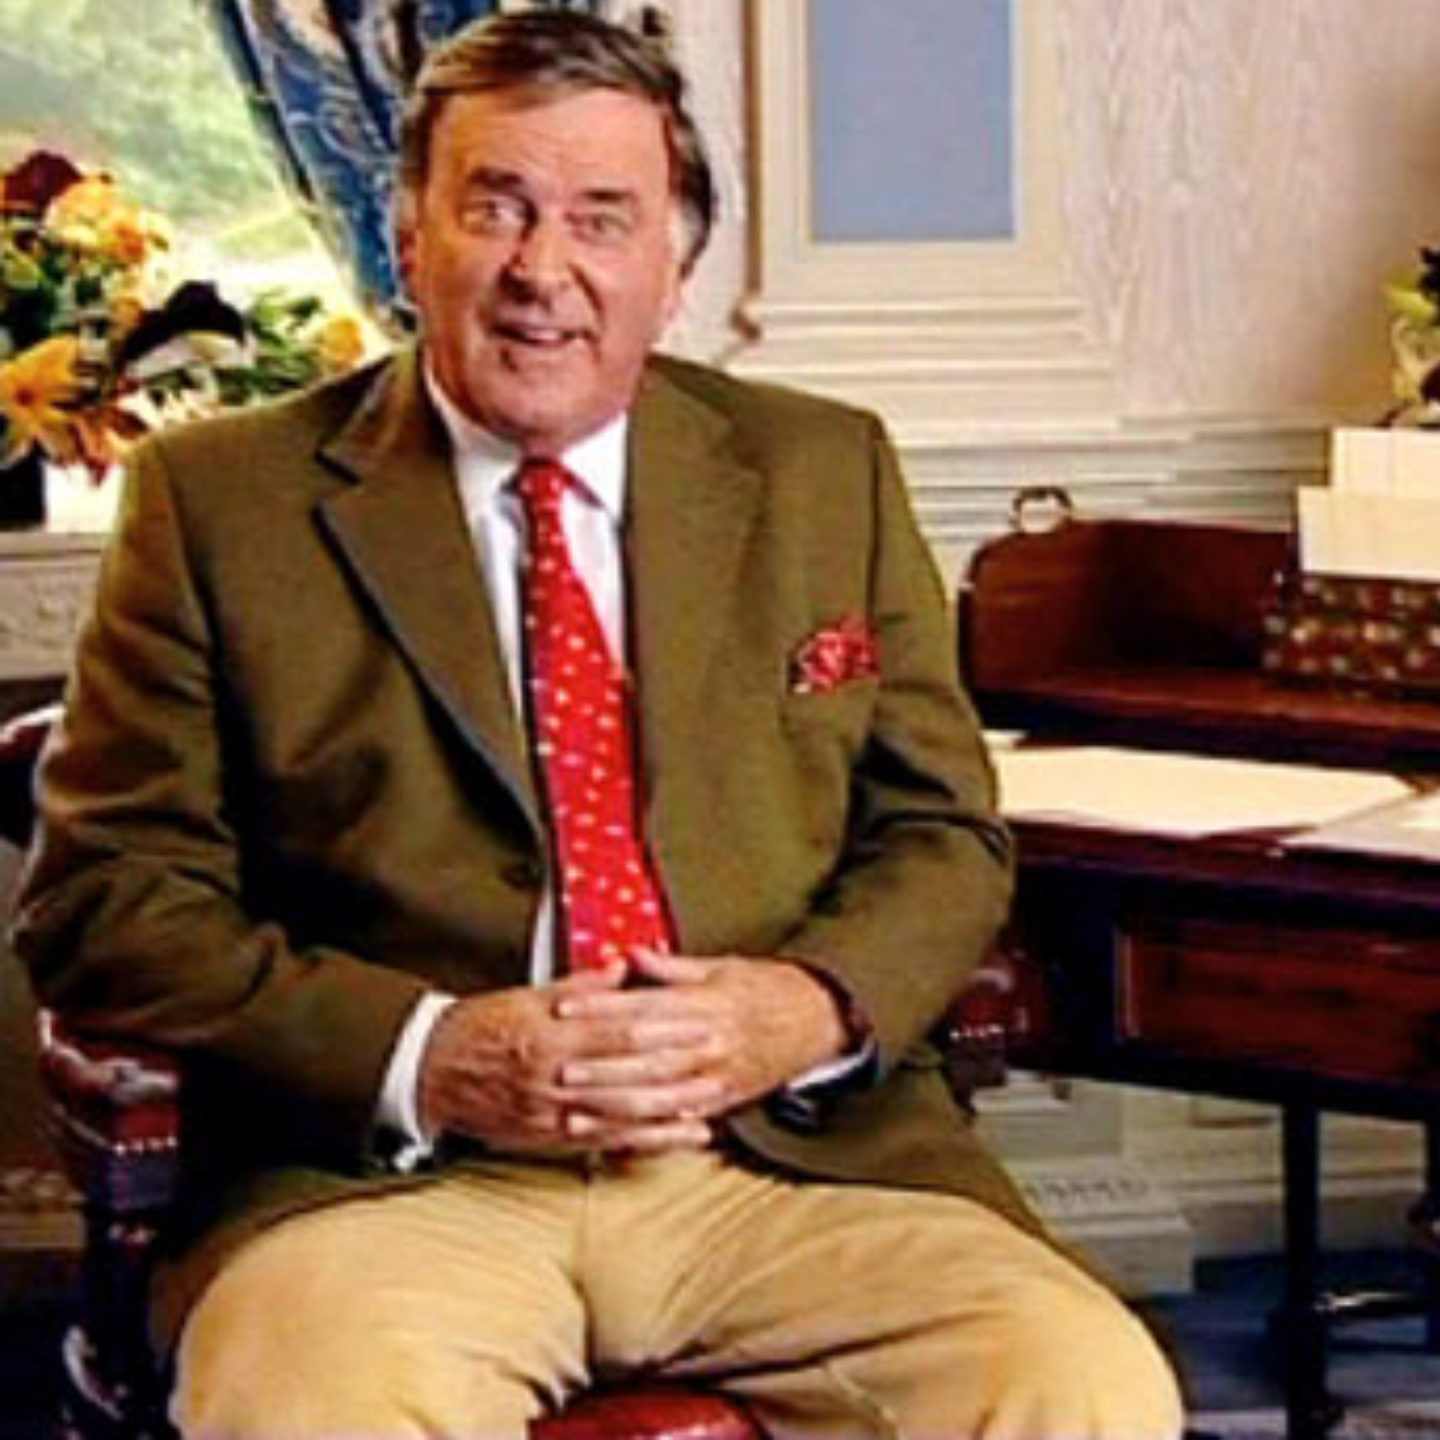 #129 - Terry Wogan’s Long Shadow (and other titles)